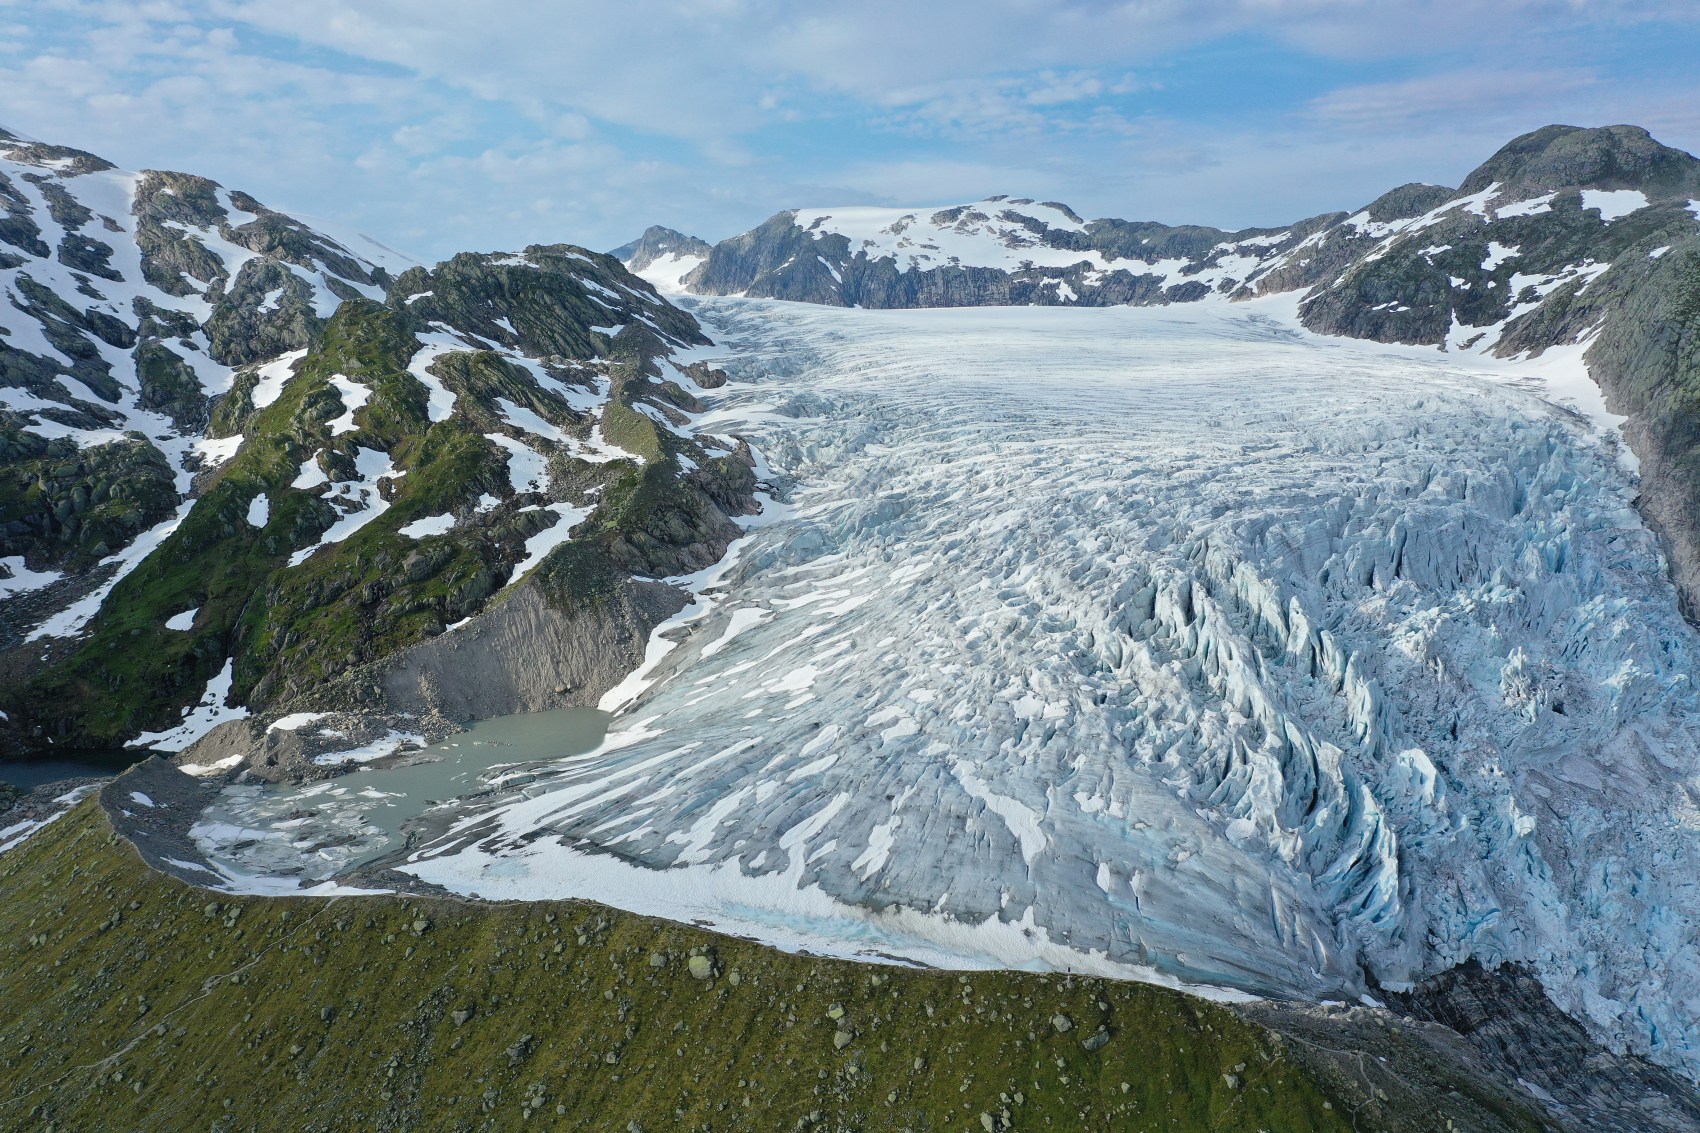 Global Warming Is Accelerating The Melting Of Norway's Glaciers